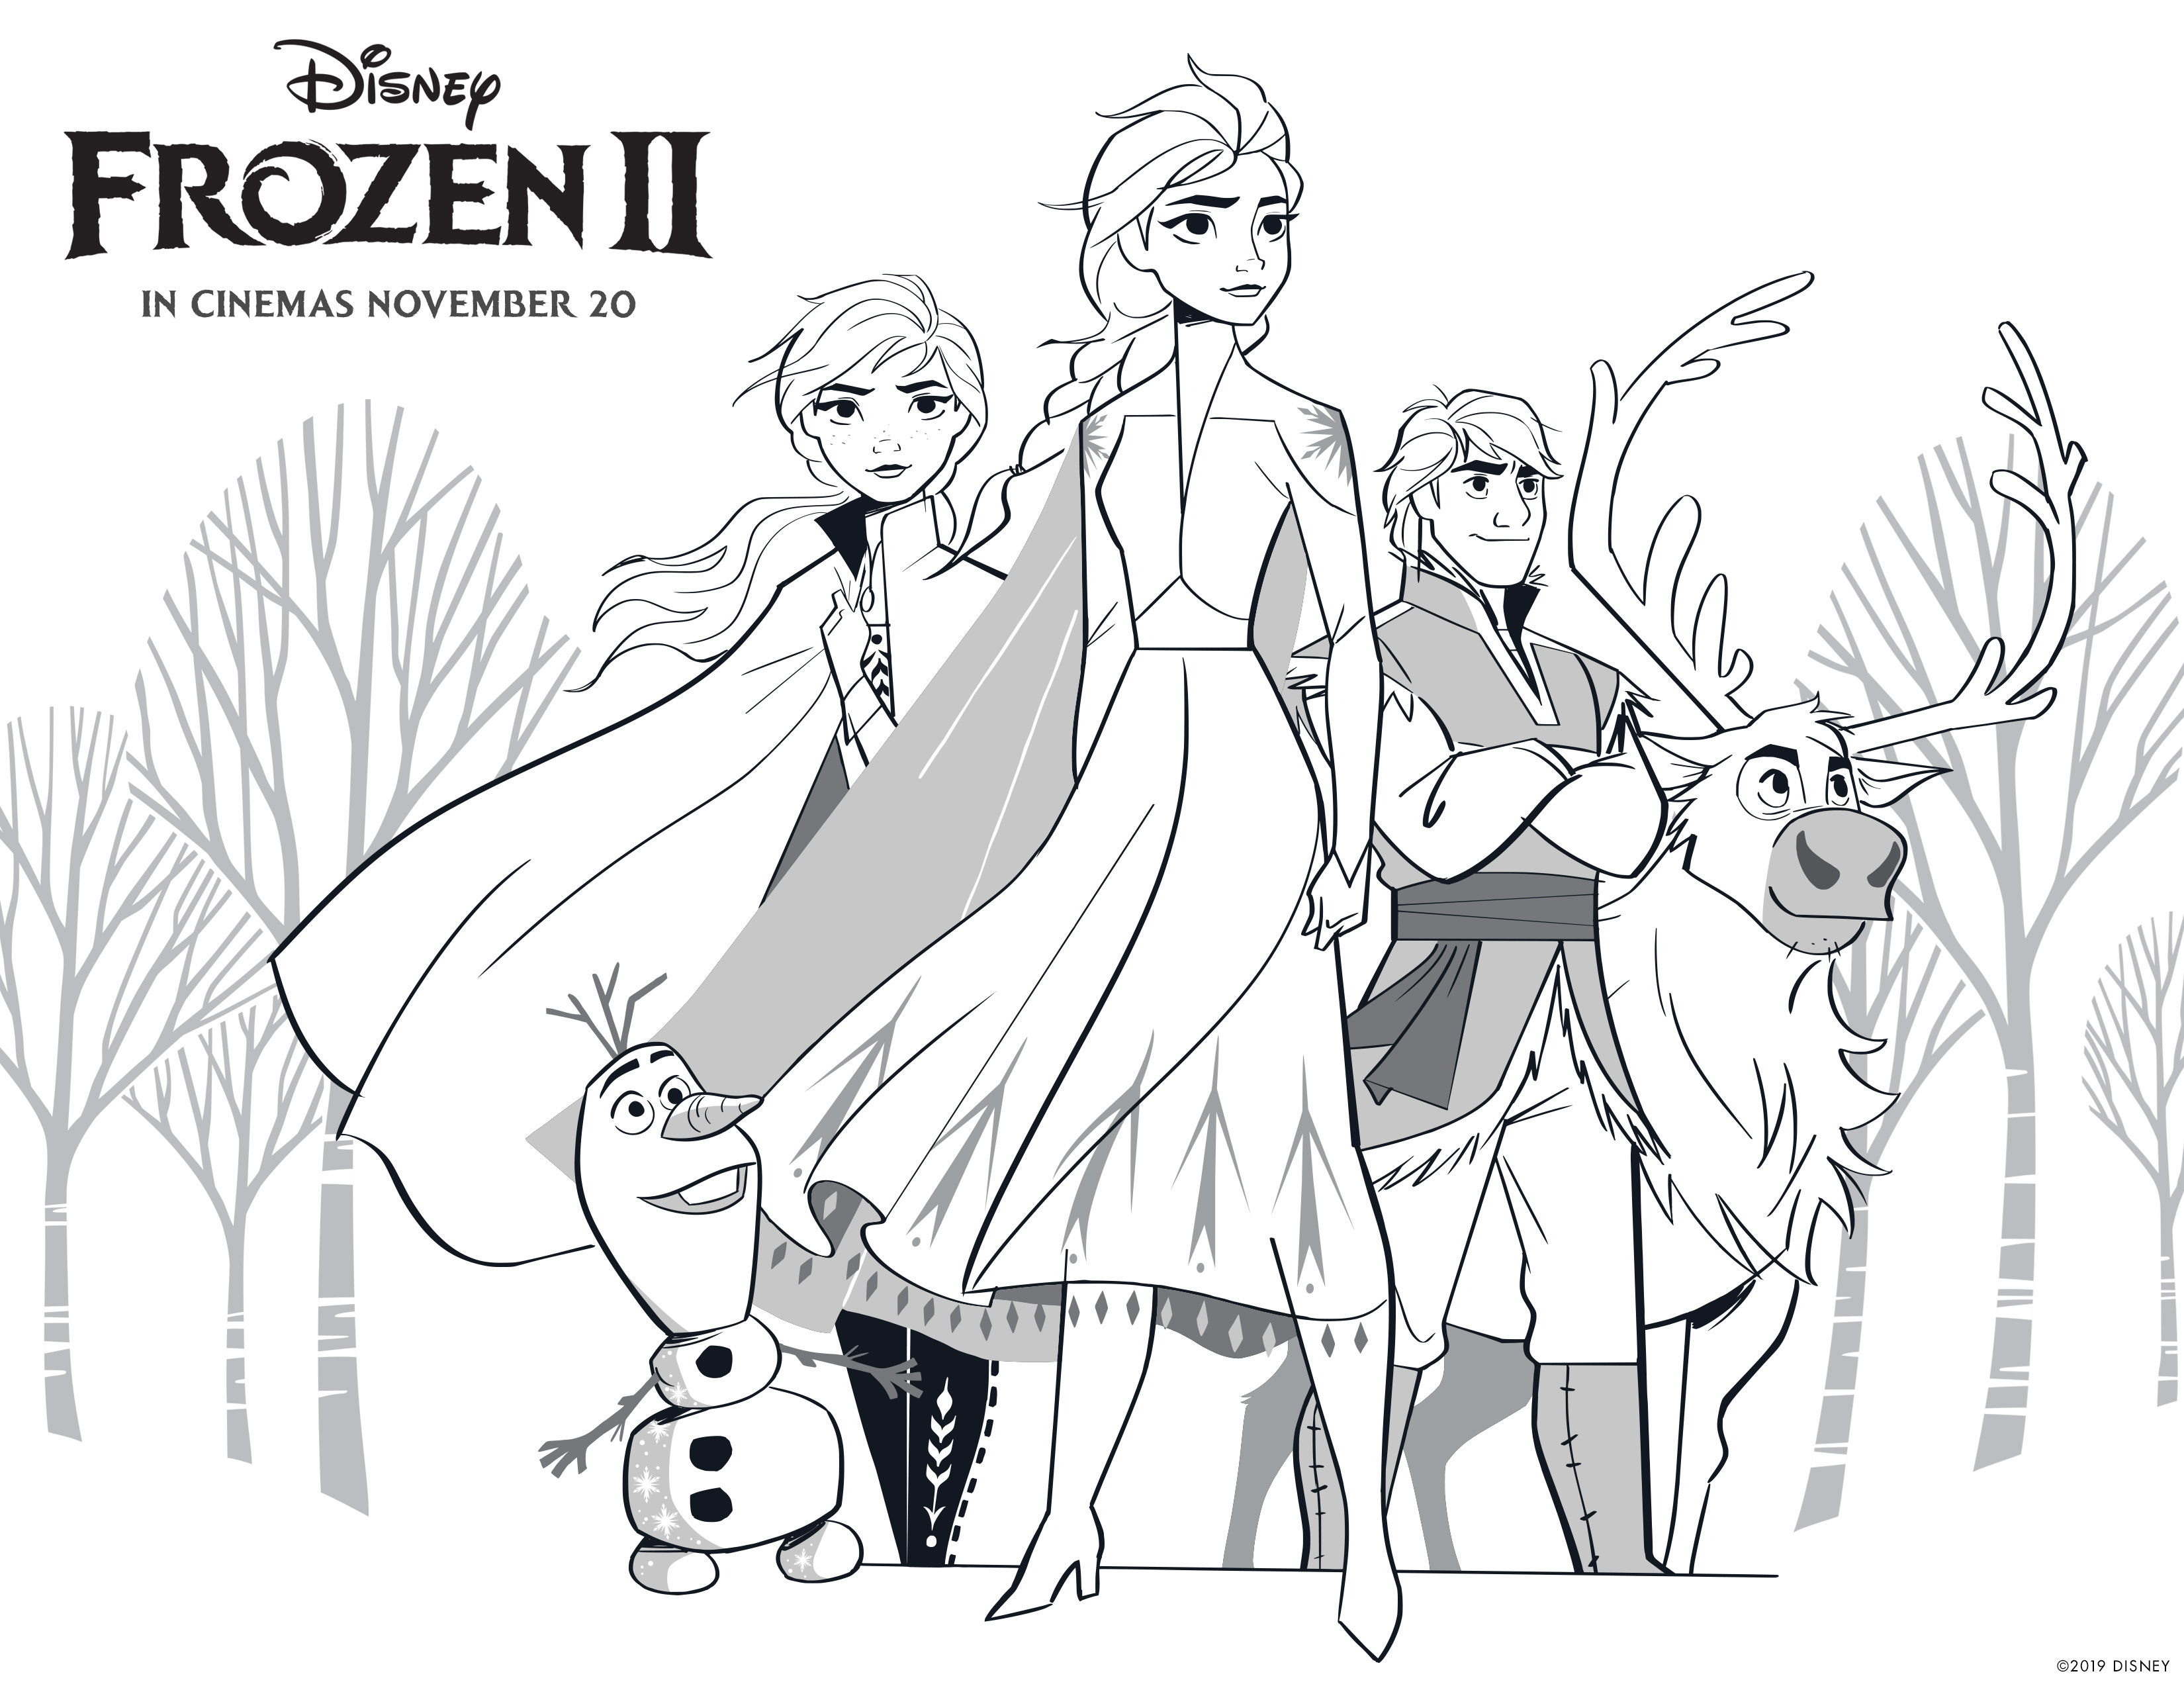 Frozen 2 Free Coloring Pages With Elsa, Anna, Olaf, Kristoff, Bruni And